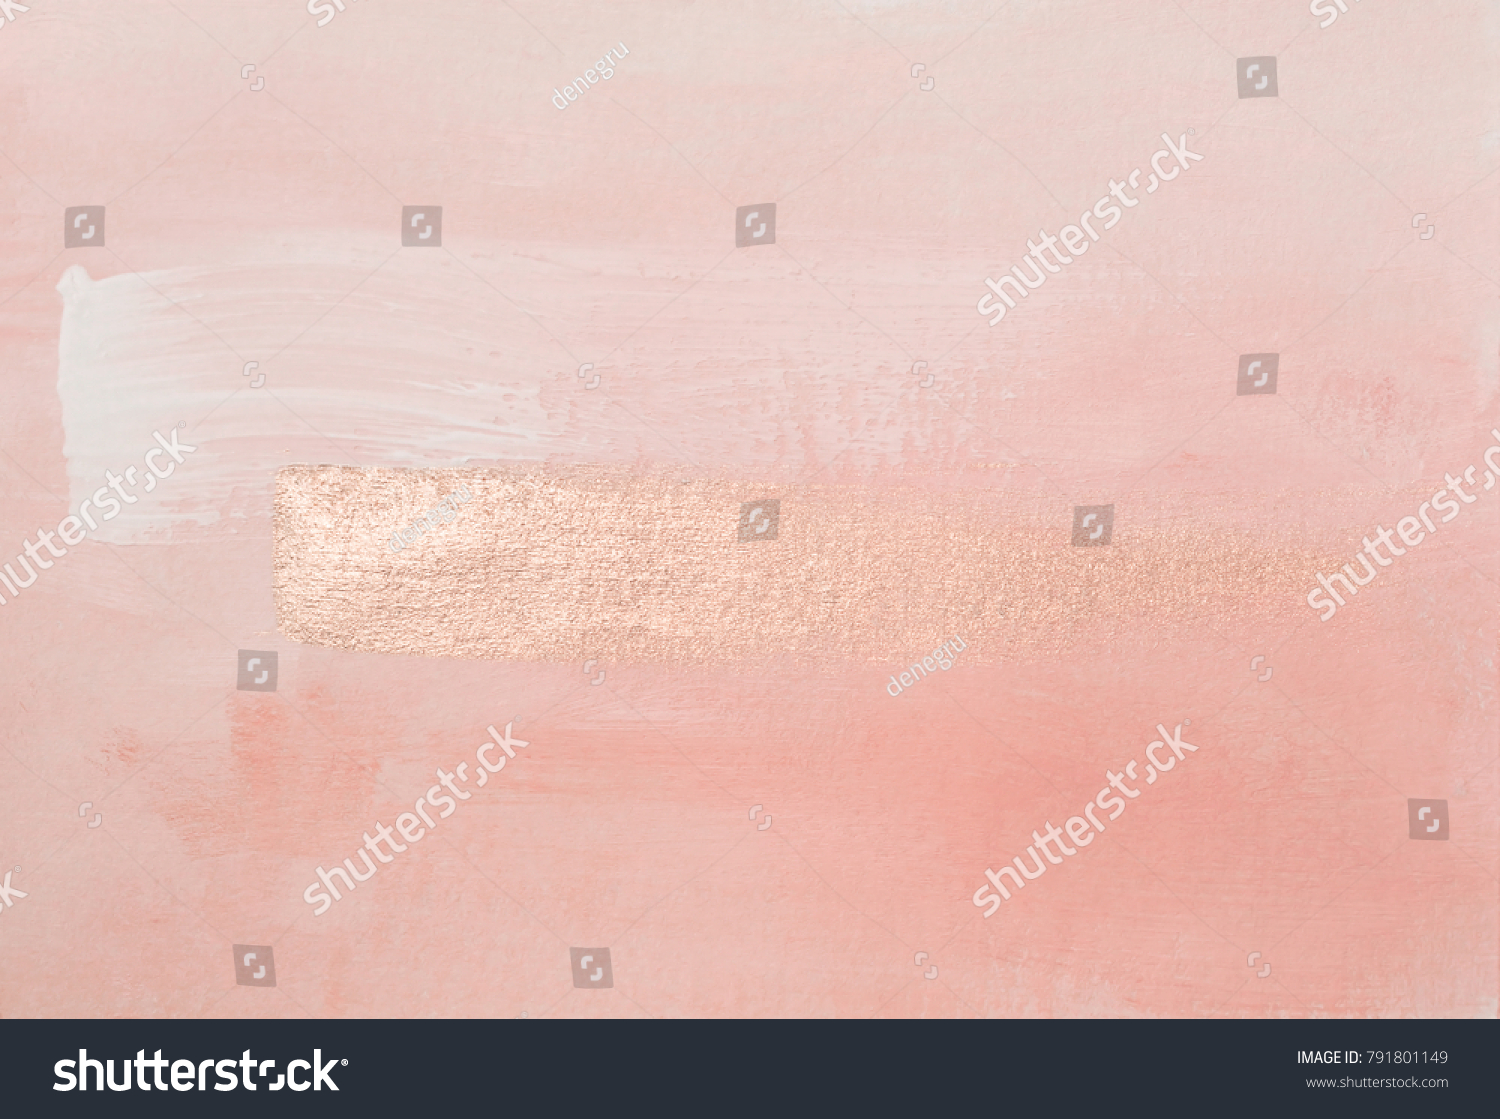 Handmade modern subtle pink abstract painted background texture with shiny metallic golden brush stroke #791801149